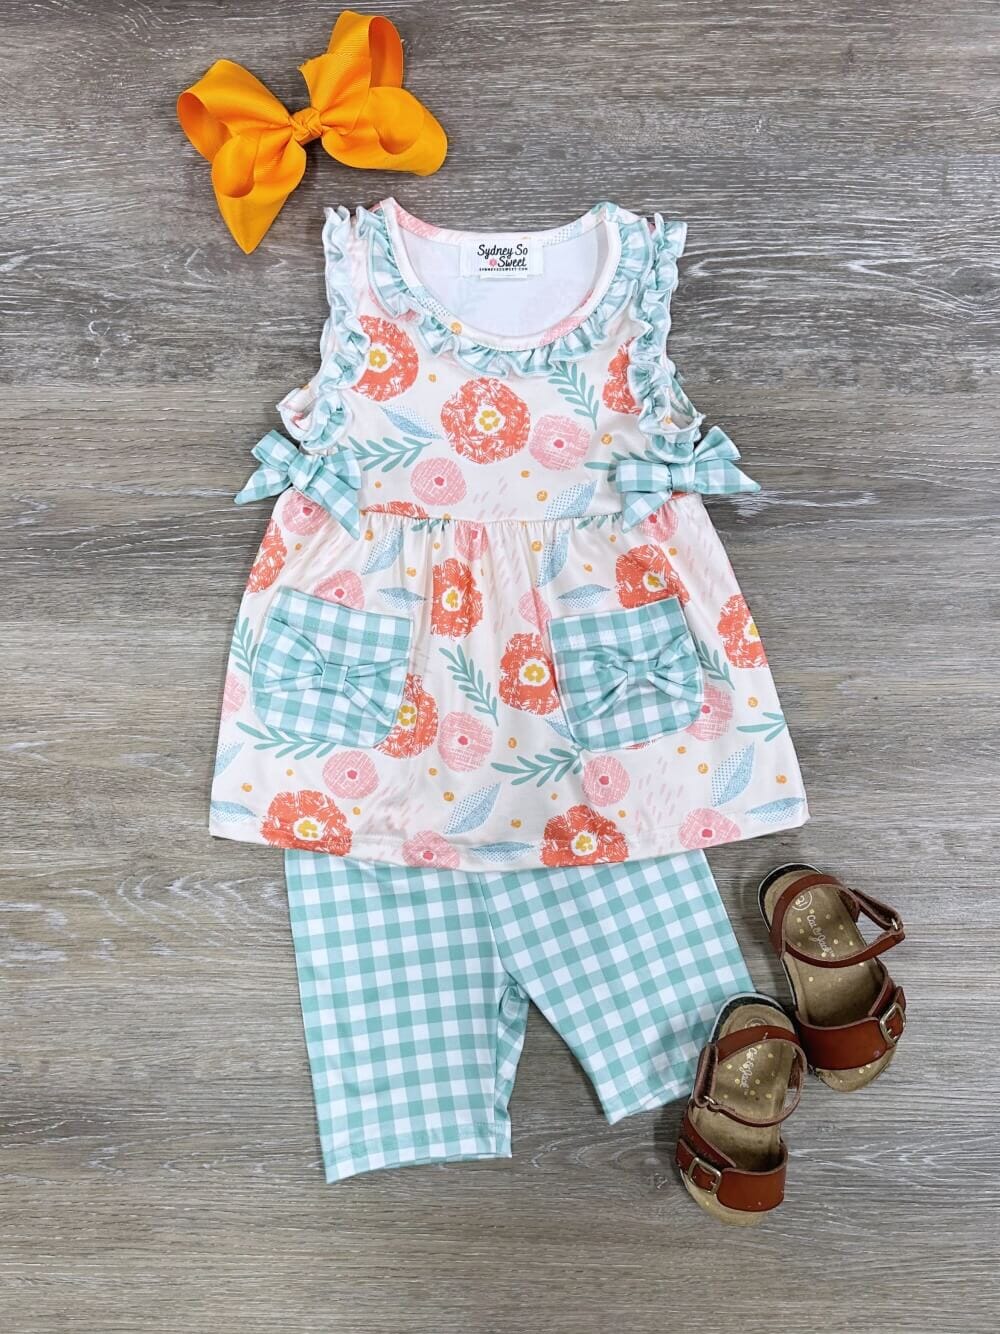 Garden Party Gingham Girls Floral & Plaid Shorts Outfit - Sydney So Sweet